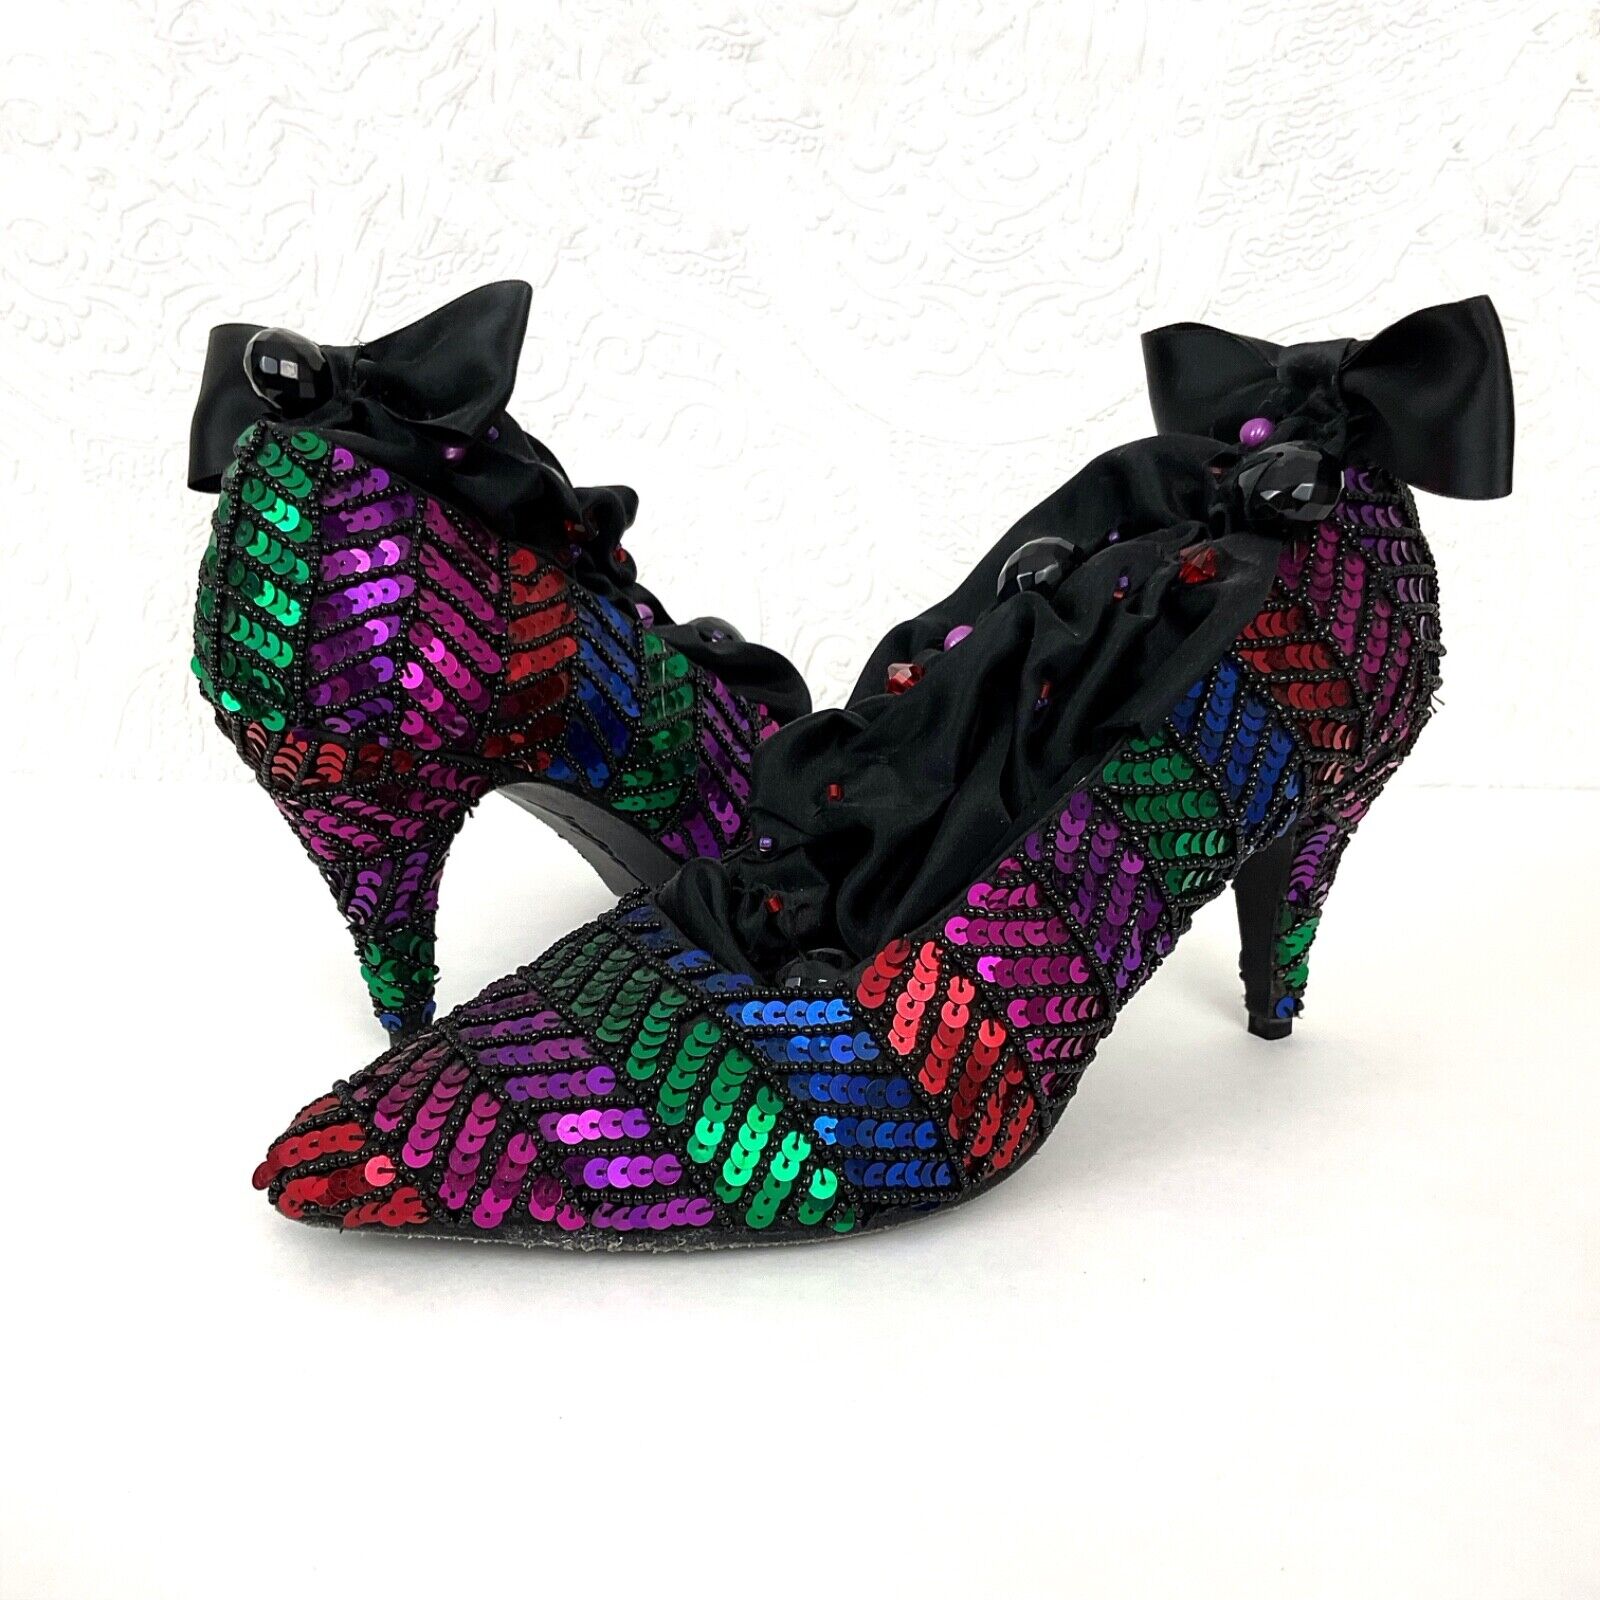 Upcycled decorative multi-colored sequined vintage high heels shelf sitters